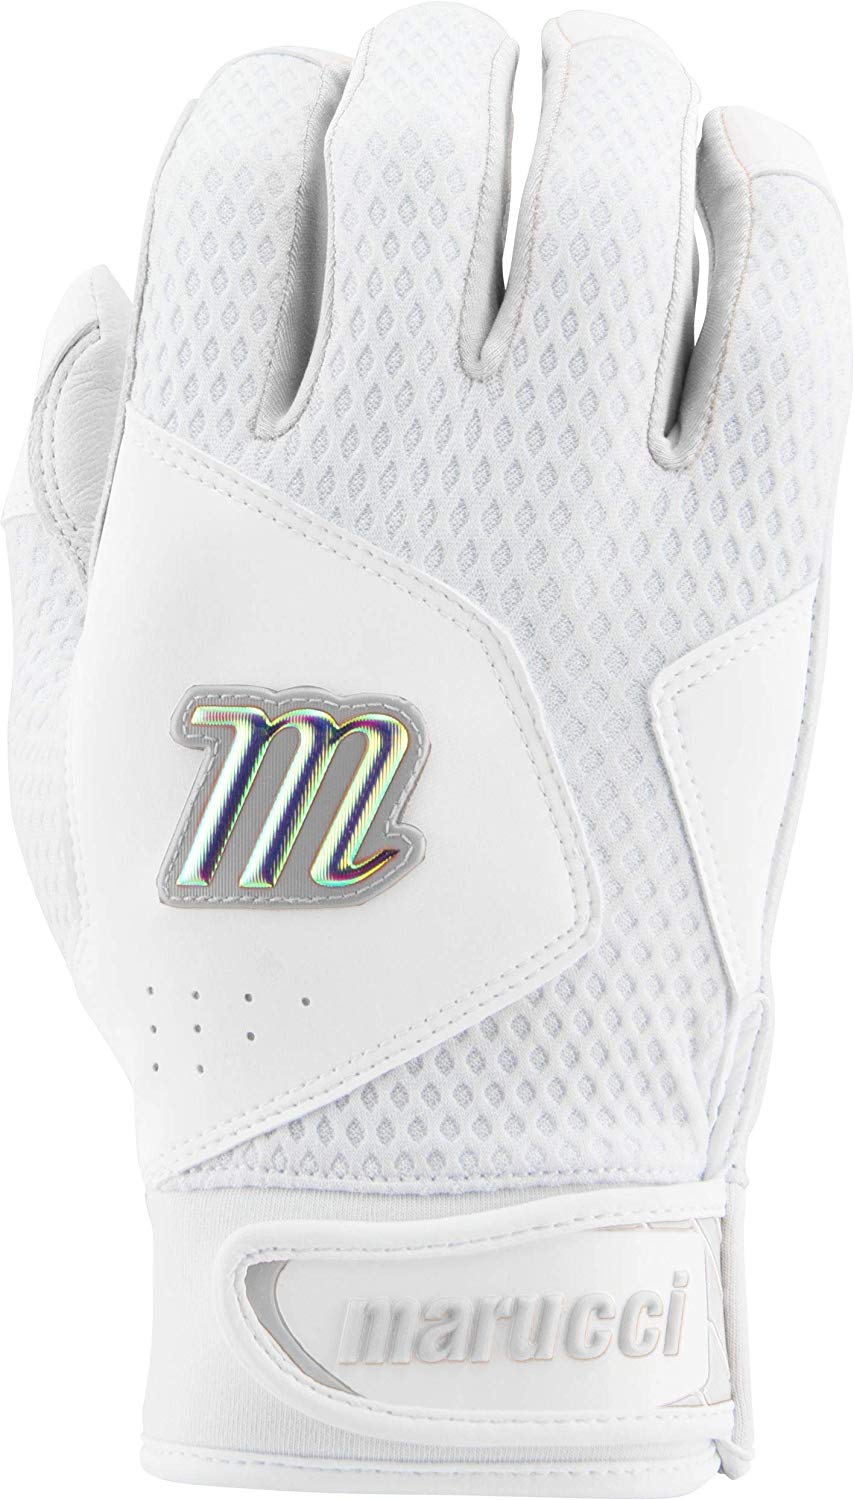 marucci-quest-2-0-adult-large-batting-gloves-white MBGQST2-WW-AL Marucci 849817085431 <p>Durable genuine leather palm Dimpled mesh back Neoprene cuff.</p>  